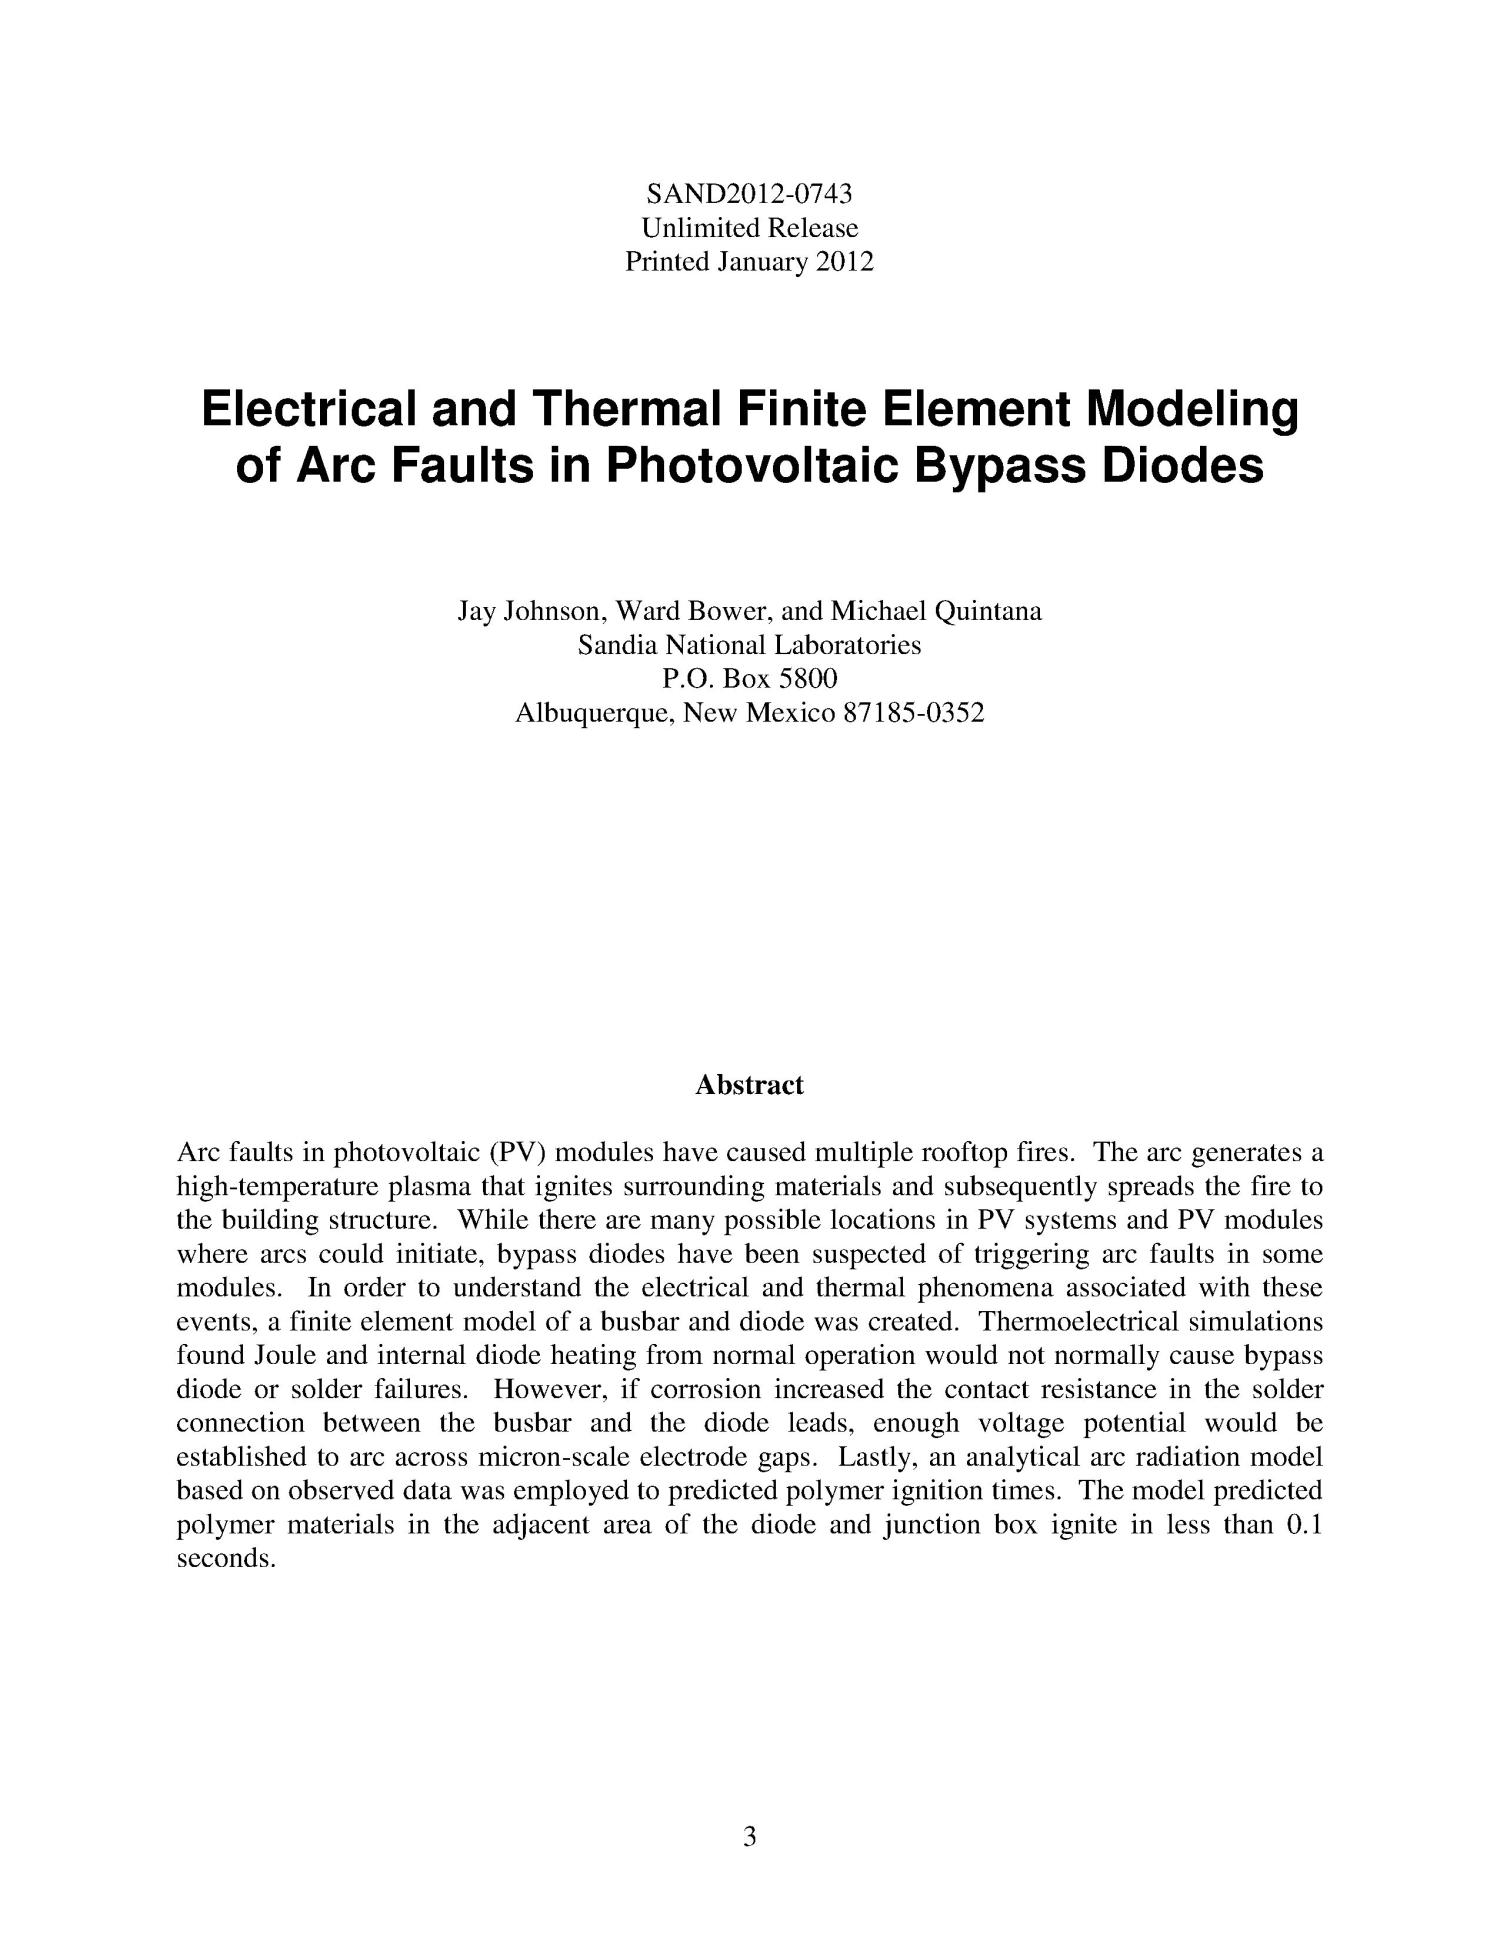 Electrical and thermal finite element modeling of arc faults in photovoltaic bypass diodes.
                                                
                                                    [Sequence #]: 3 of 33
                                                